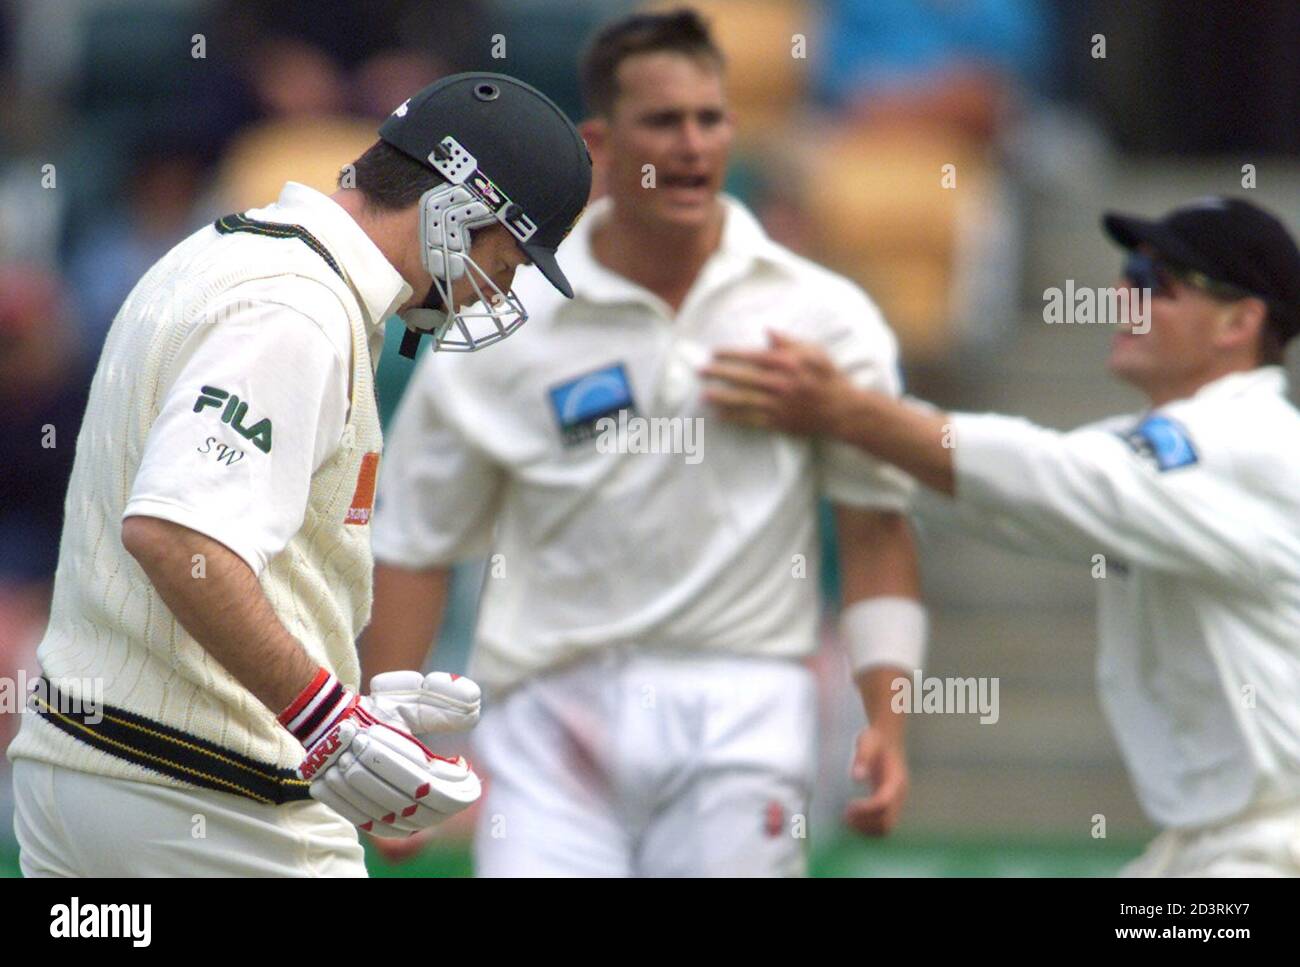 NEW ZEALAND'S SHANE BOND IS CONGRATULATED AFTER DISMISSING AUSTRALIAN  CAPTAIN STEVE WAUGH DURING THE SECOND CRICKET TEST AGAINST AUSTRALIA AT  HOBART. New Zealand's Shane Bond (C) is congratulated by teammate Matthew  Bell